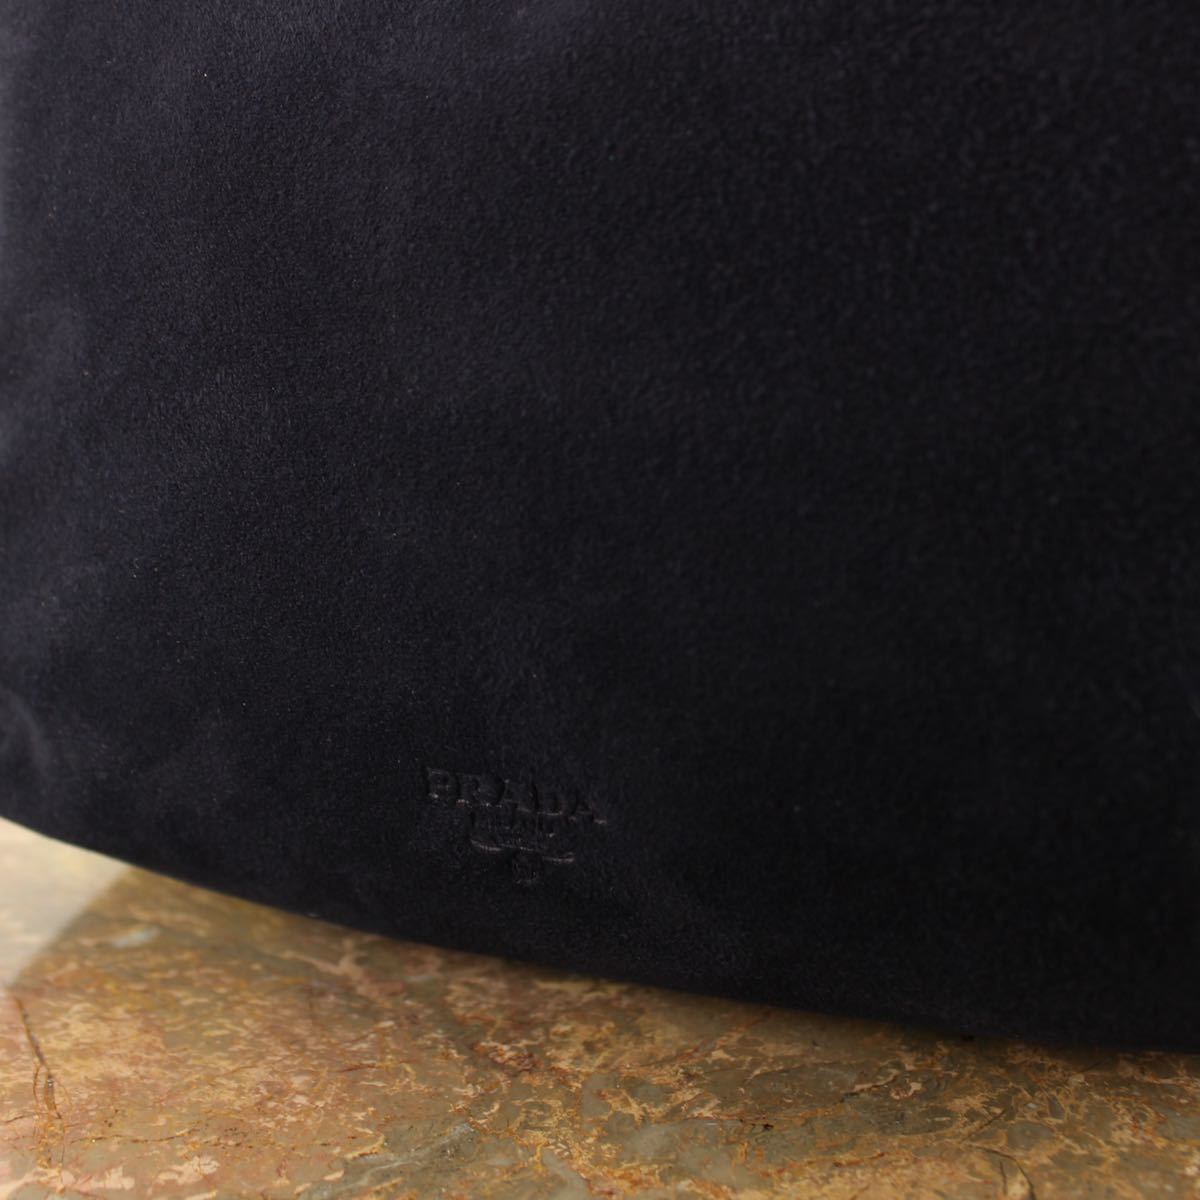 PRADA LOGO EMBOSSED SUEDE LEATHER CHAIN SHOULDER BAG MADE IN ITALY/プラダロゴ型押しスウェードレザーチェーンショルダーバッグ_画像5